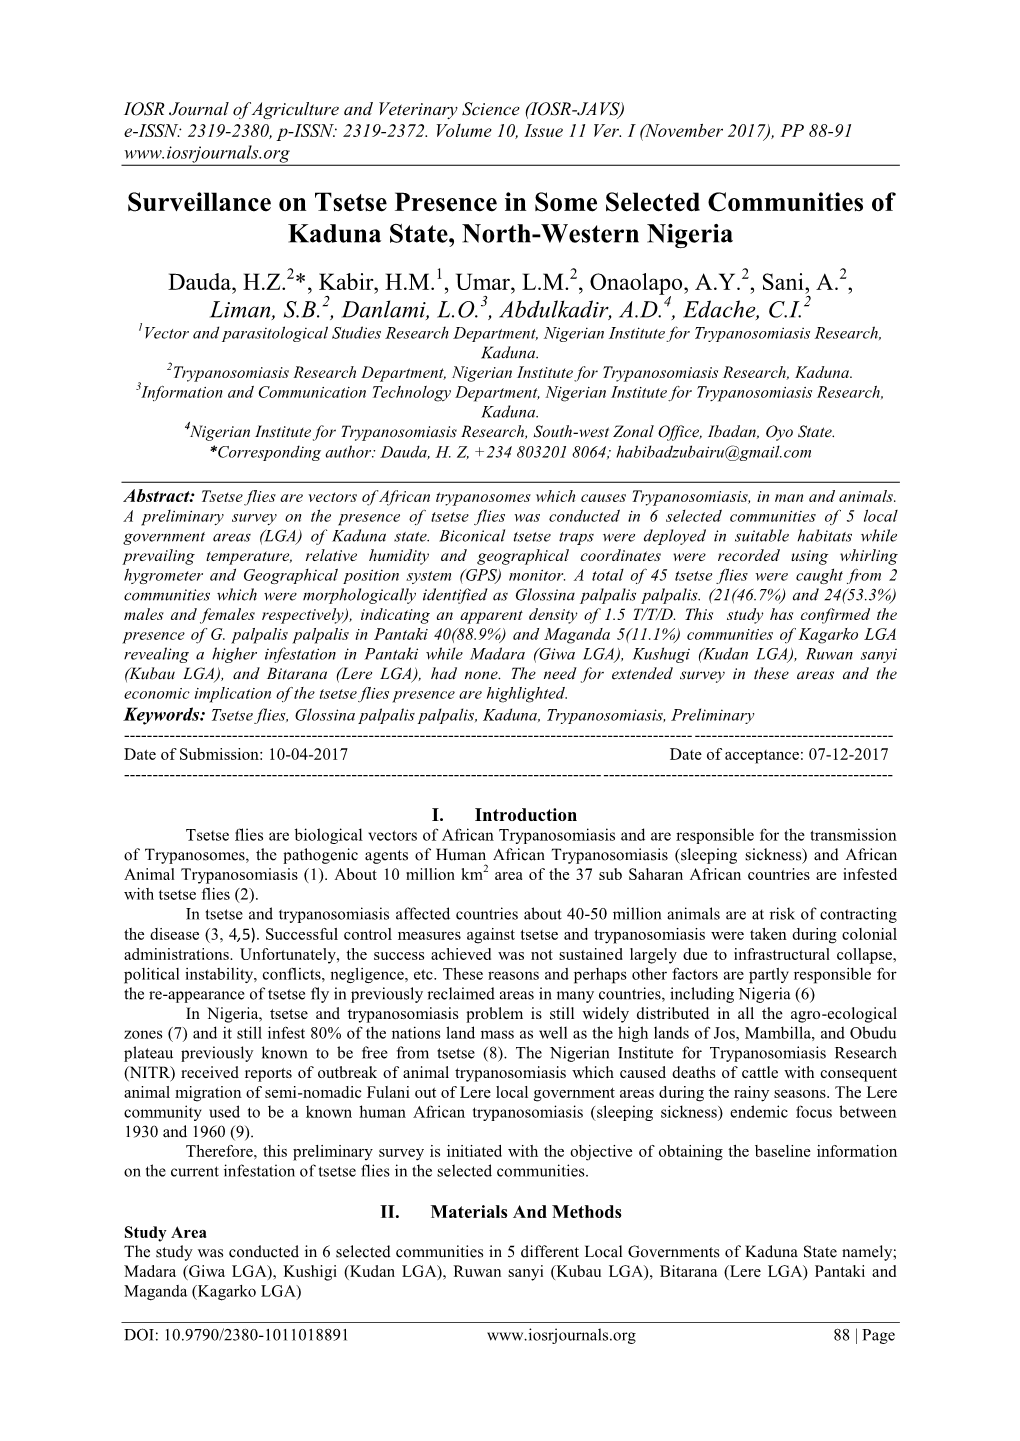 Surveillance on Tsetse Presence in Some Selected Communities of Kaduna State, North-Western Nigeria